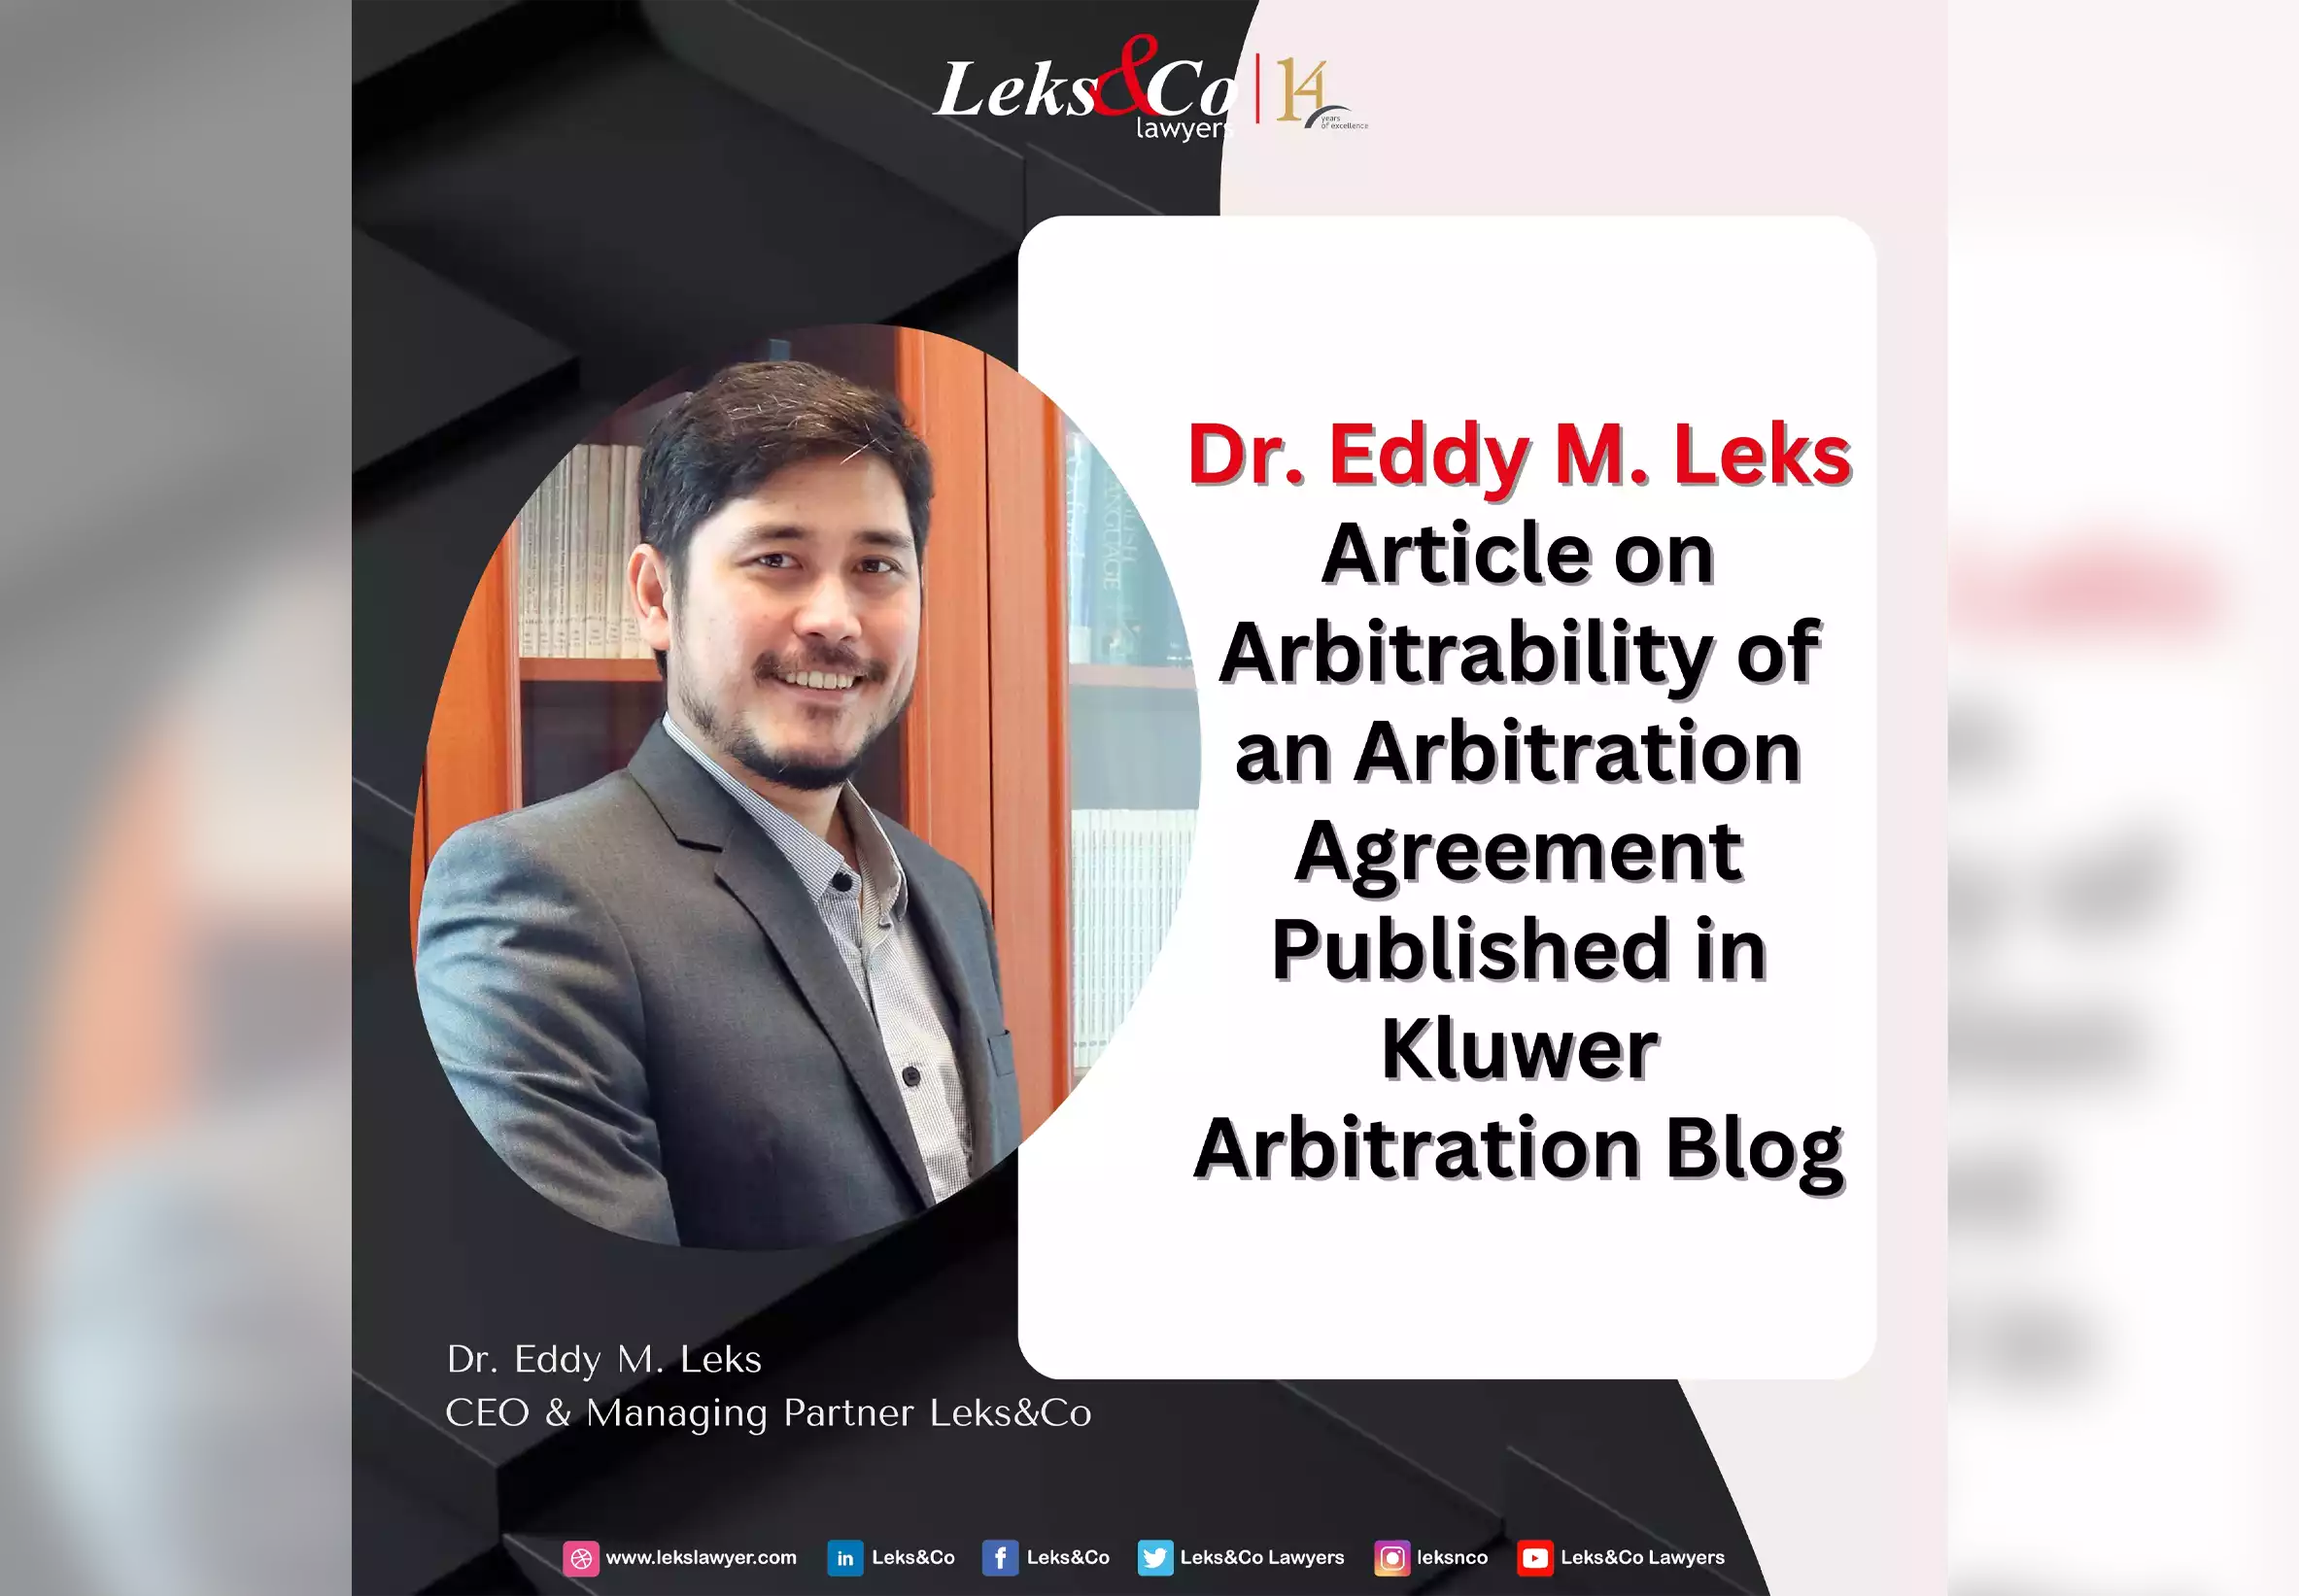 Dr. Eddy M. Leks Article on Arbitrability of an Arbitration Agreement  Published in Kluwer Arbitration Blog